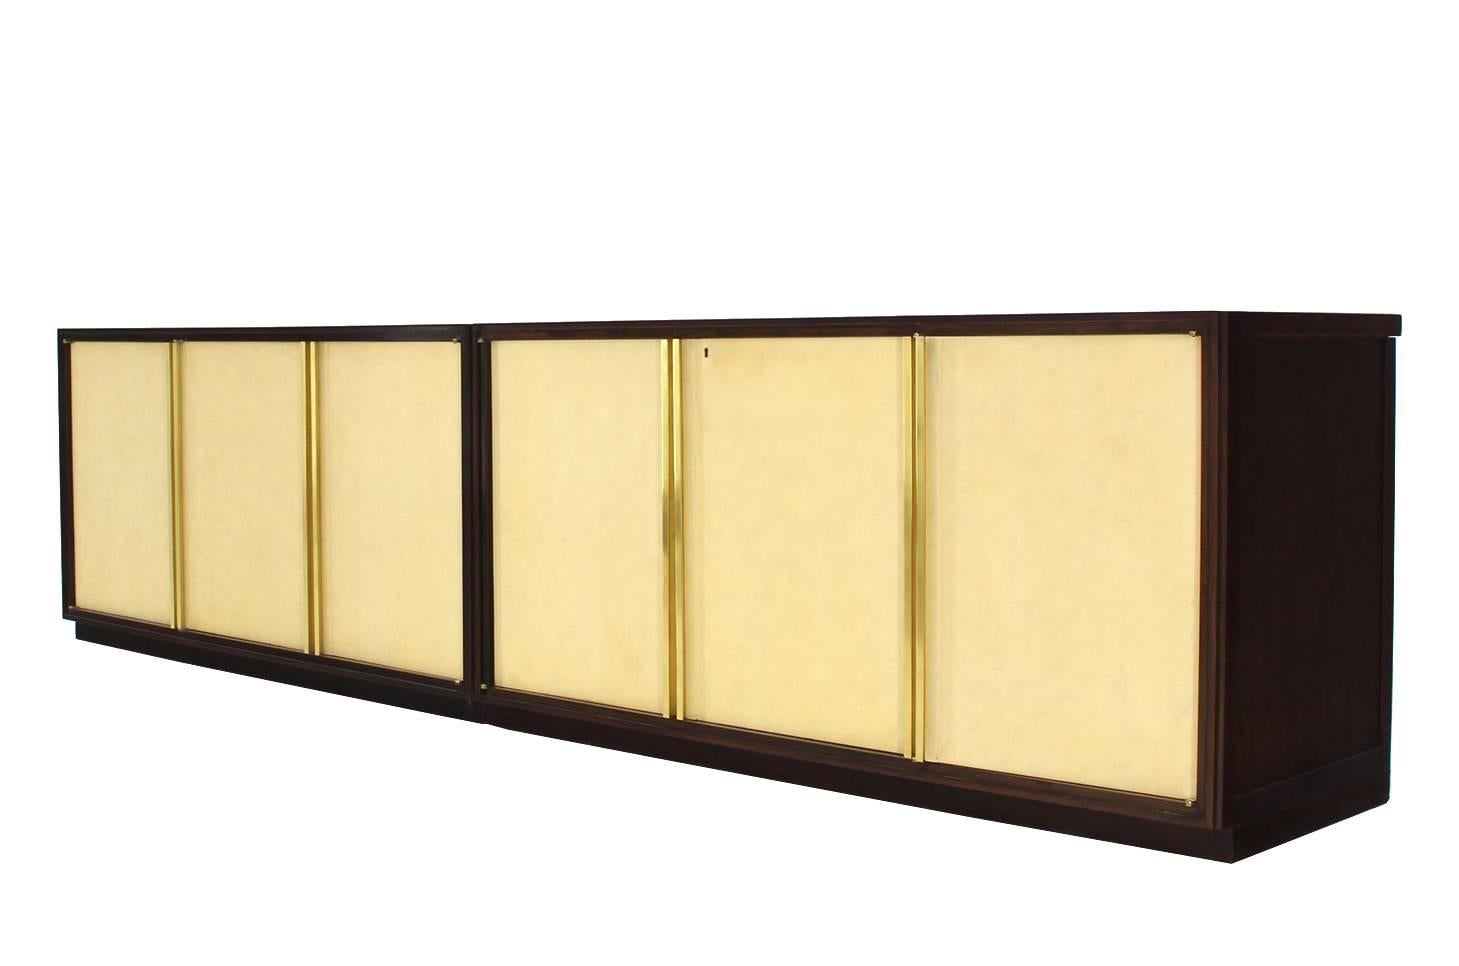 Unusual Super Long Mid-Century Modern Credenza with Bar 1